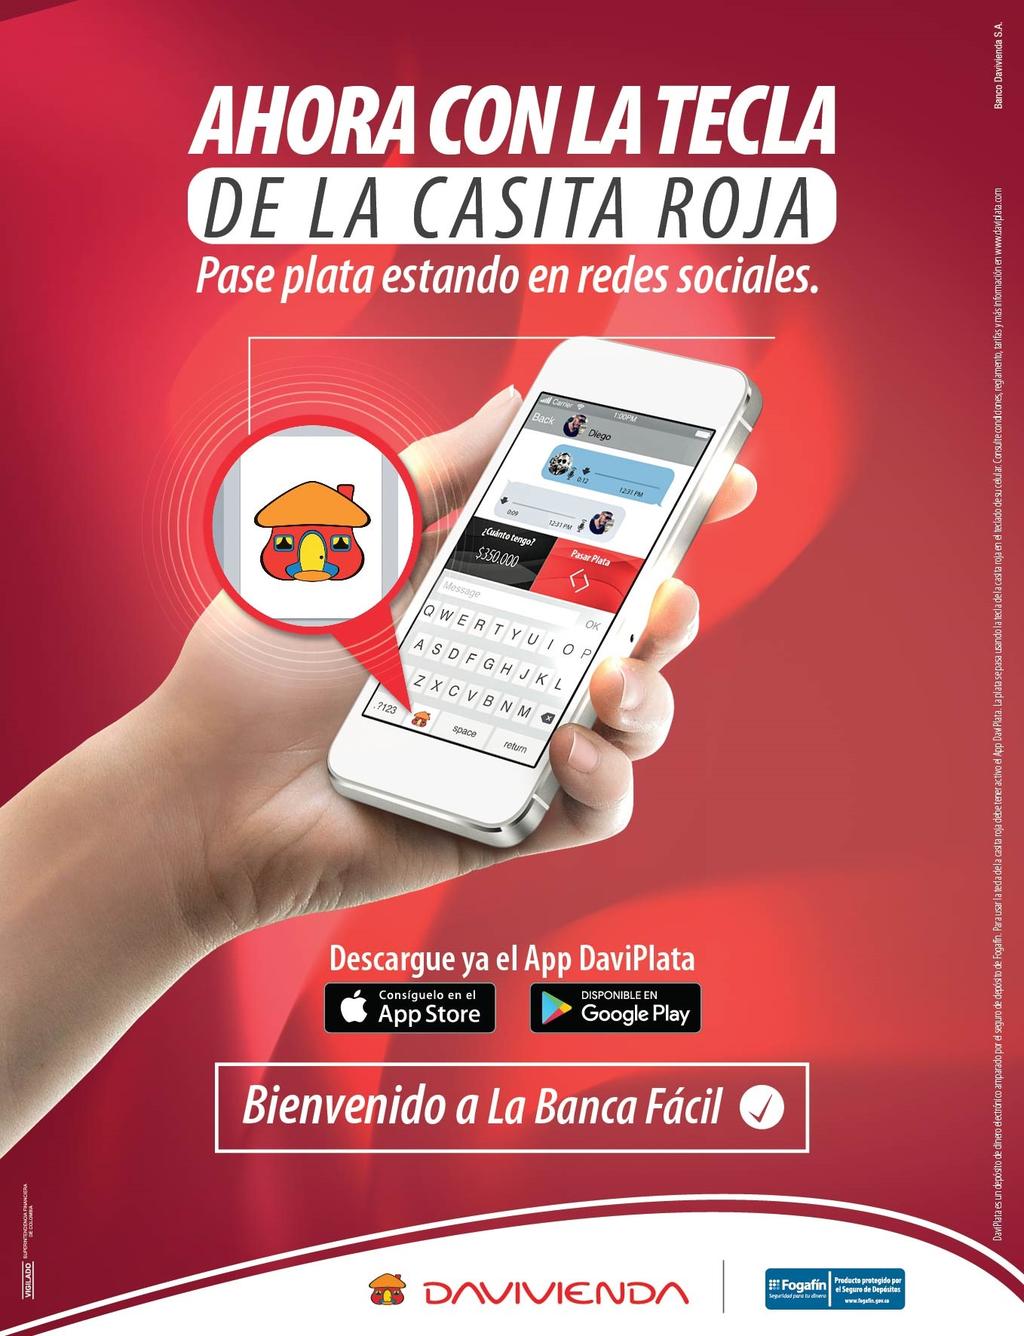 Davivienda s campaign to drive adoption of the new keyboard Right after the new solution went live, Davivienda launched a multichannel campaign, with the aim of introducing their mobile users